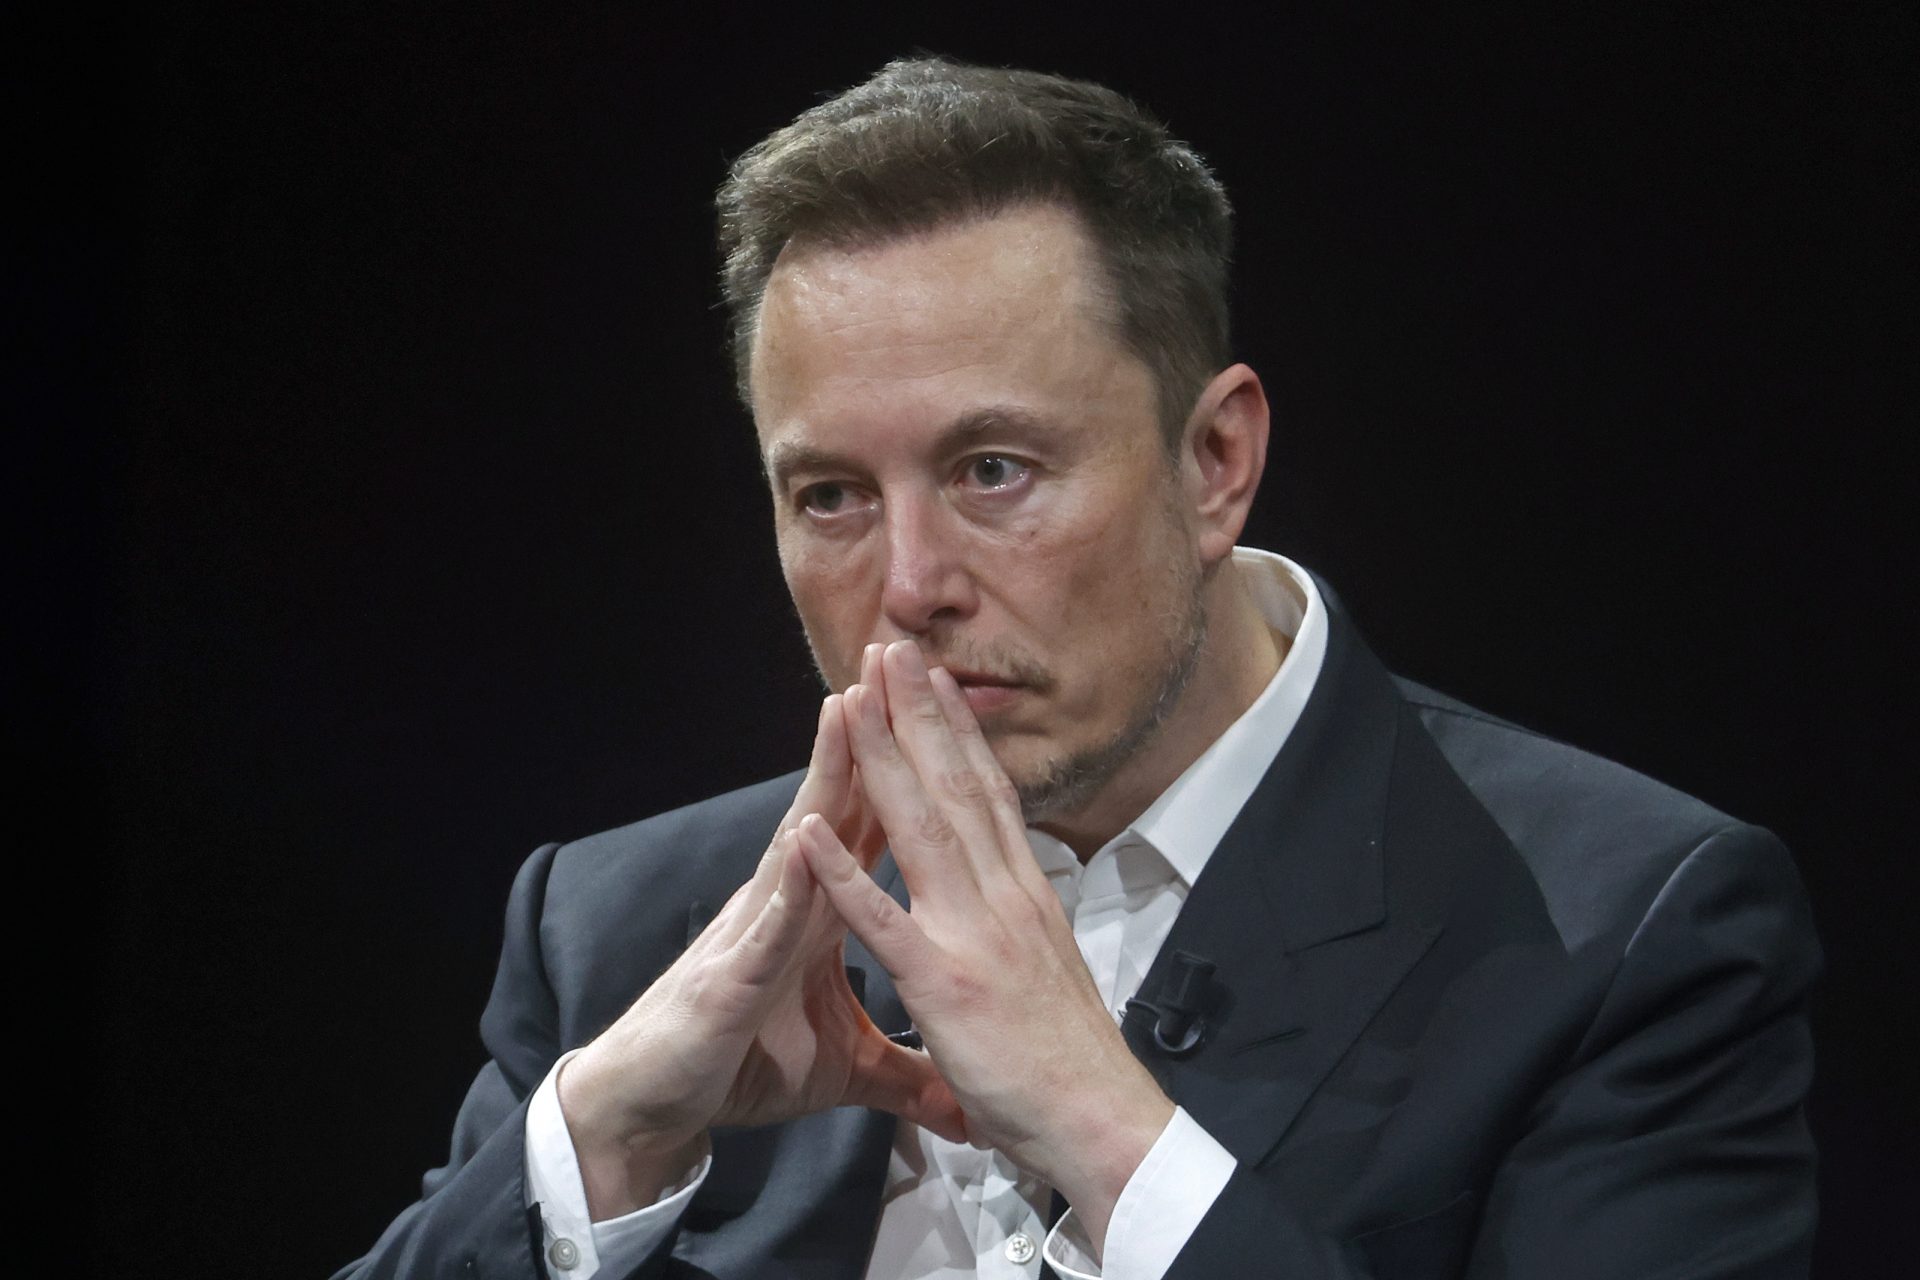 Musk considers this “philanthropy”